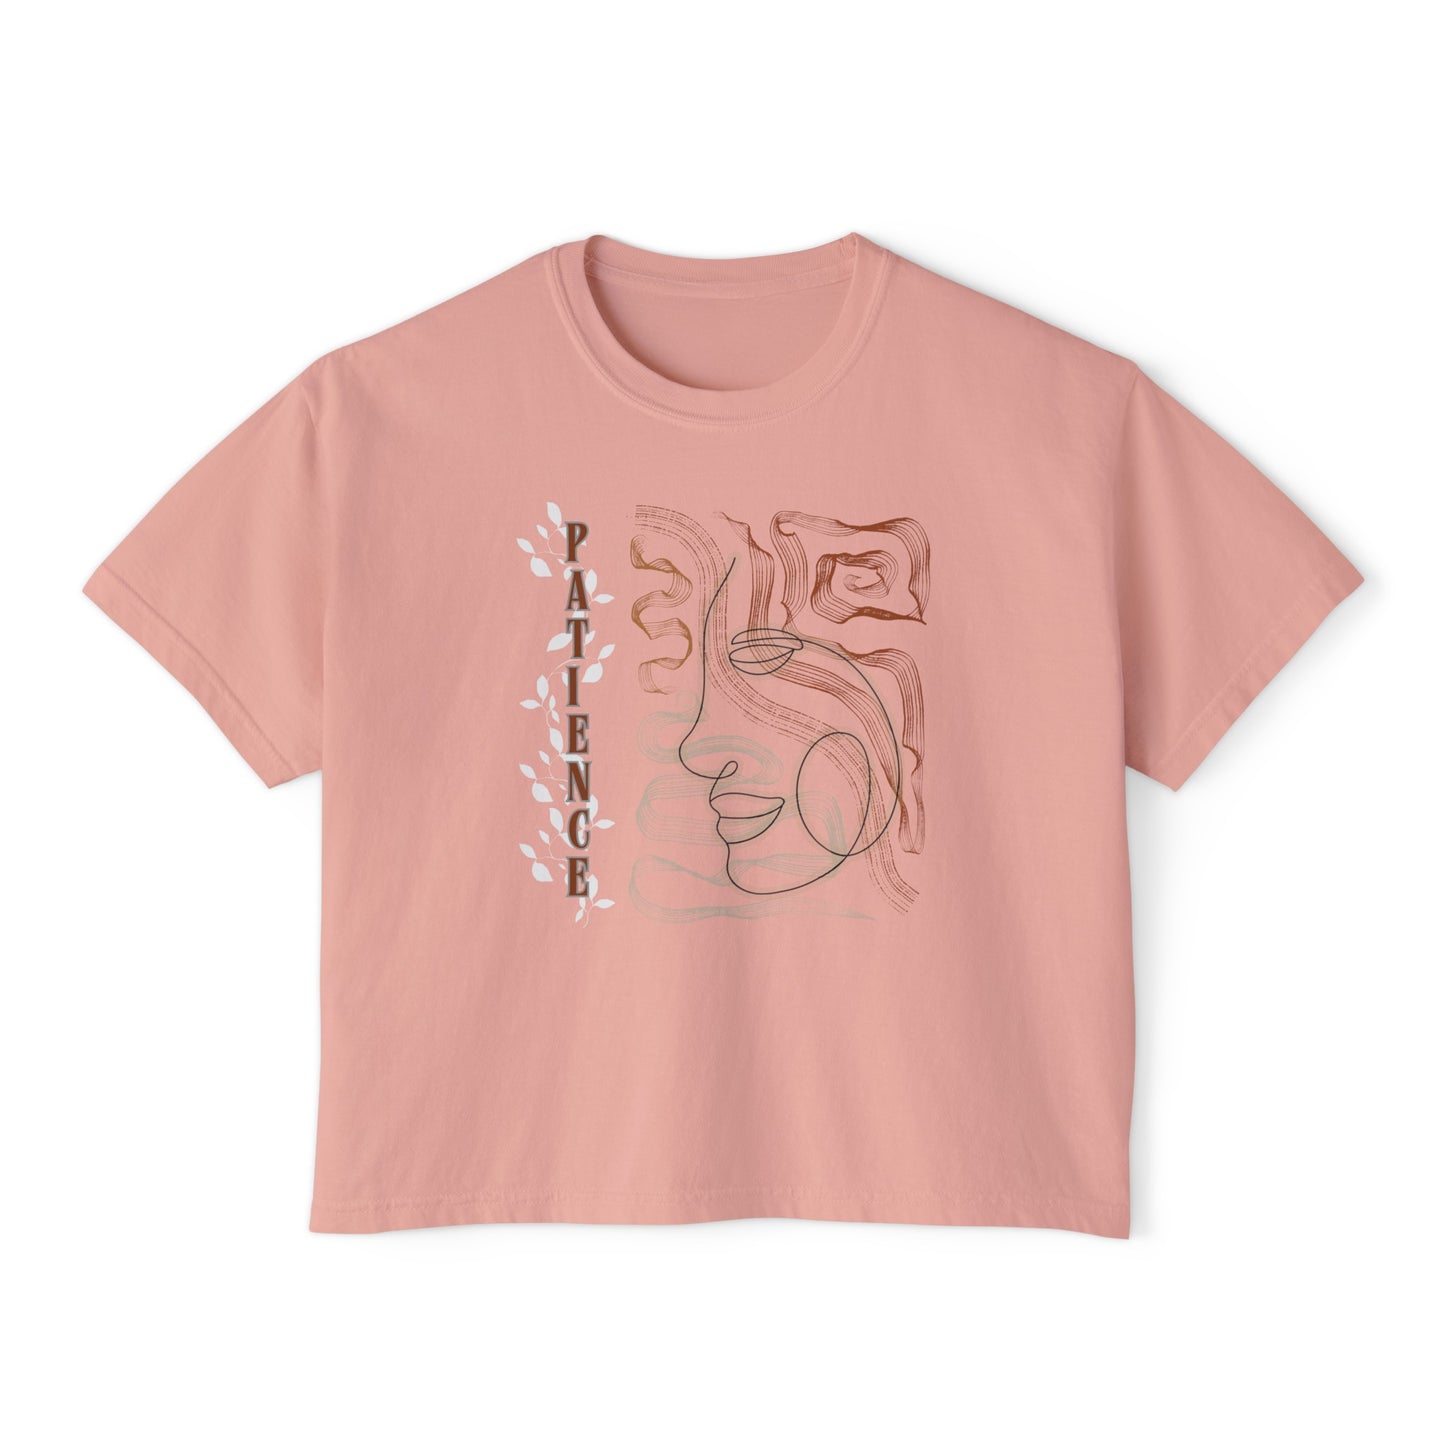 Women's Boxy Tee with Abstract Face Doodle Drawing - "PATIENCE"